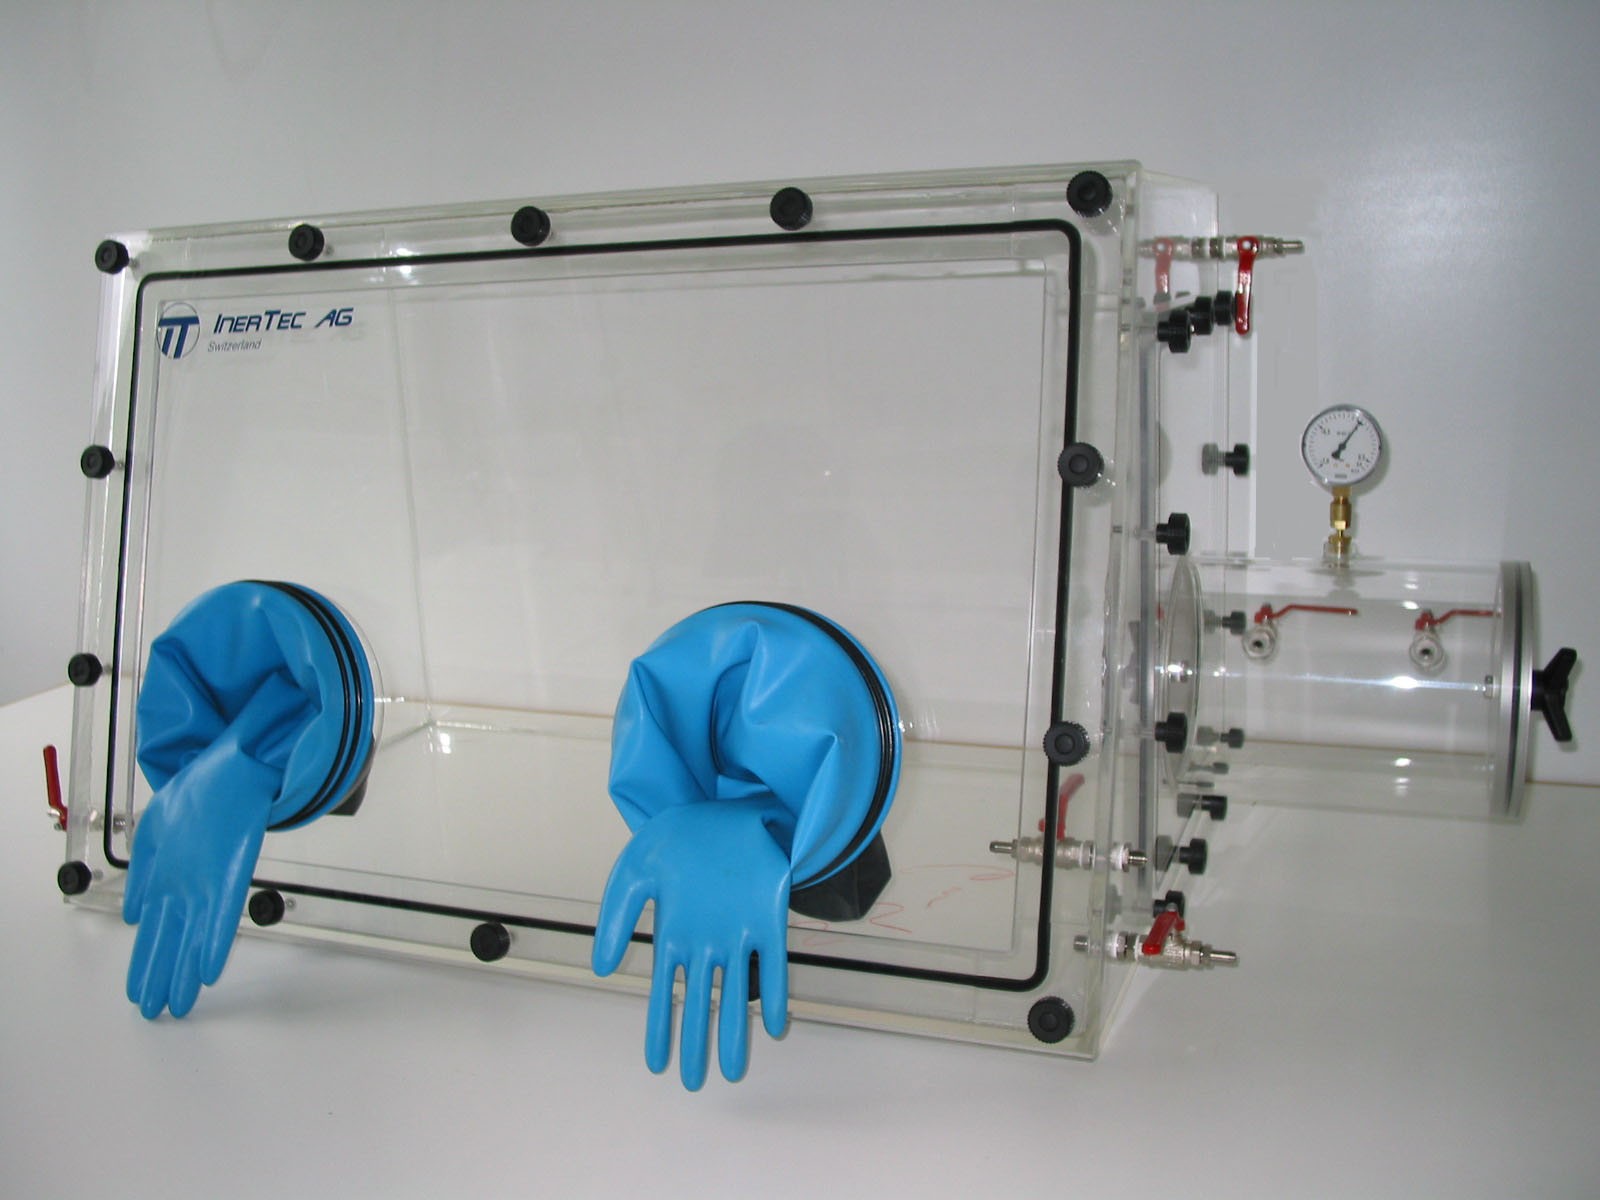 Glovebox made of acrylic&gt; Gas filling: automatic flushing with pressure control, front version: standard, side version: rectangular lock control: oxygen regulator and humidity display with data logger